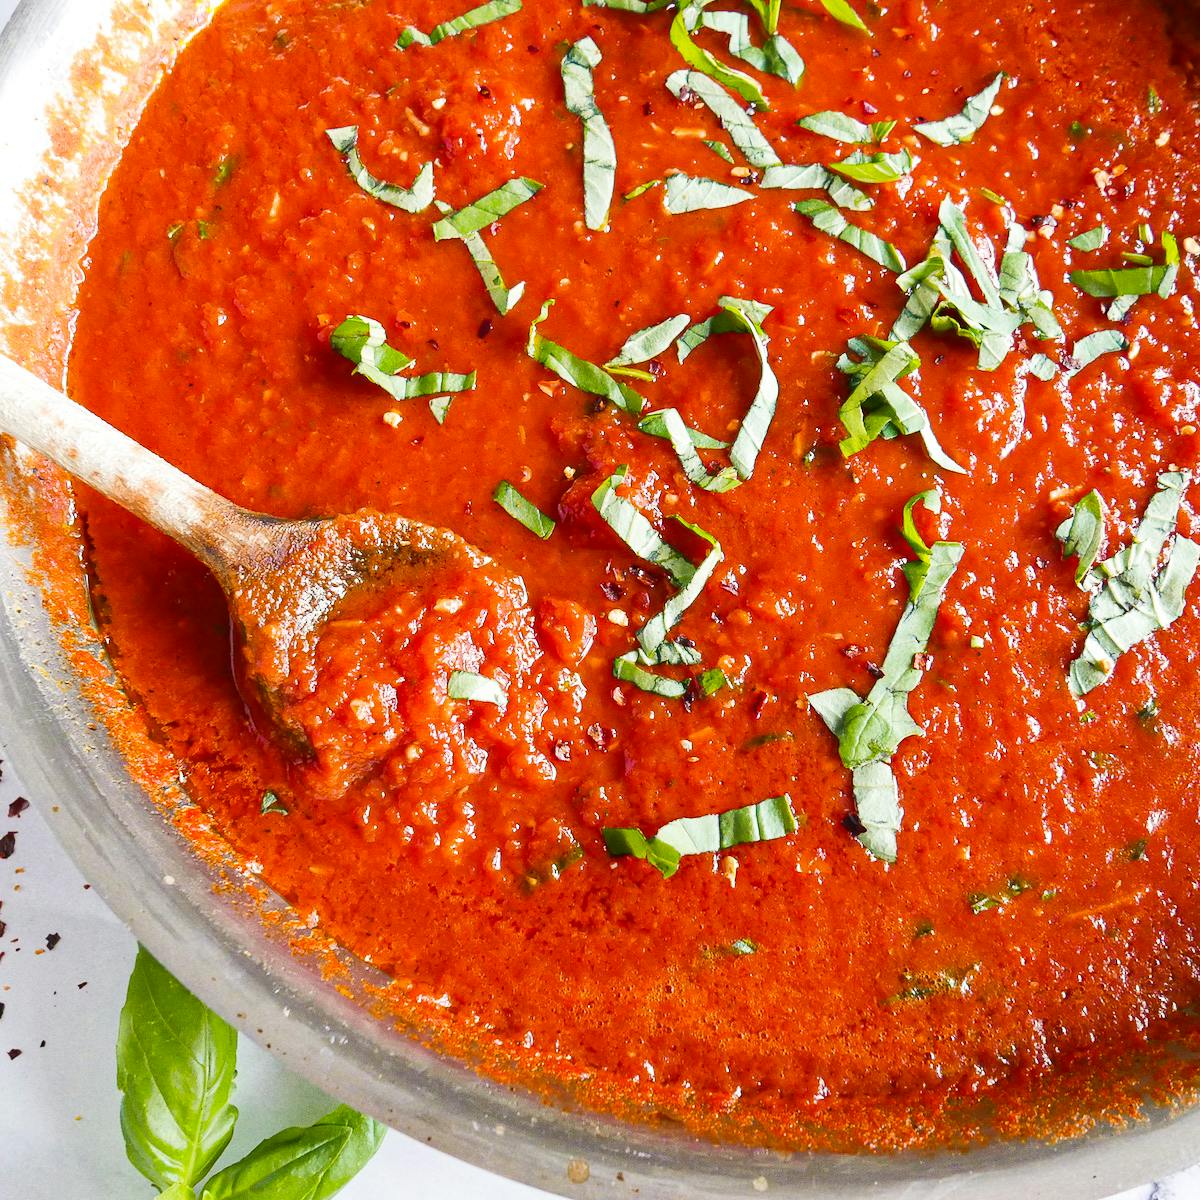 Homemade tomato sauce in a large skillet with a wooden spoon.